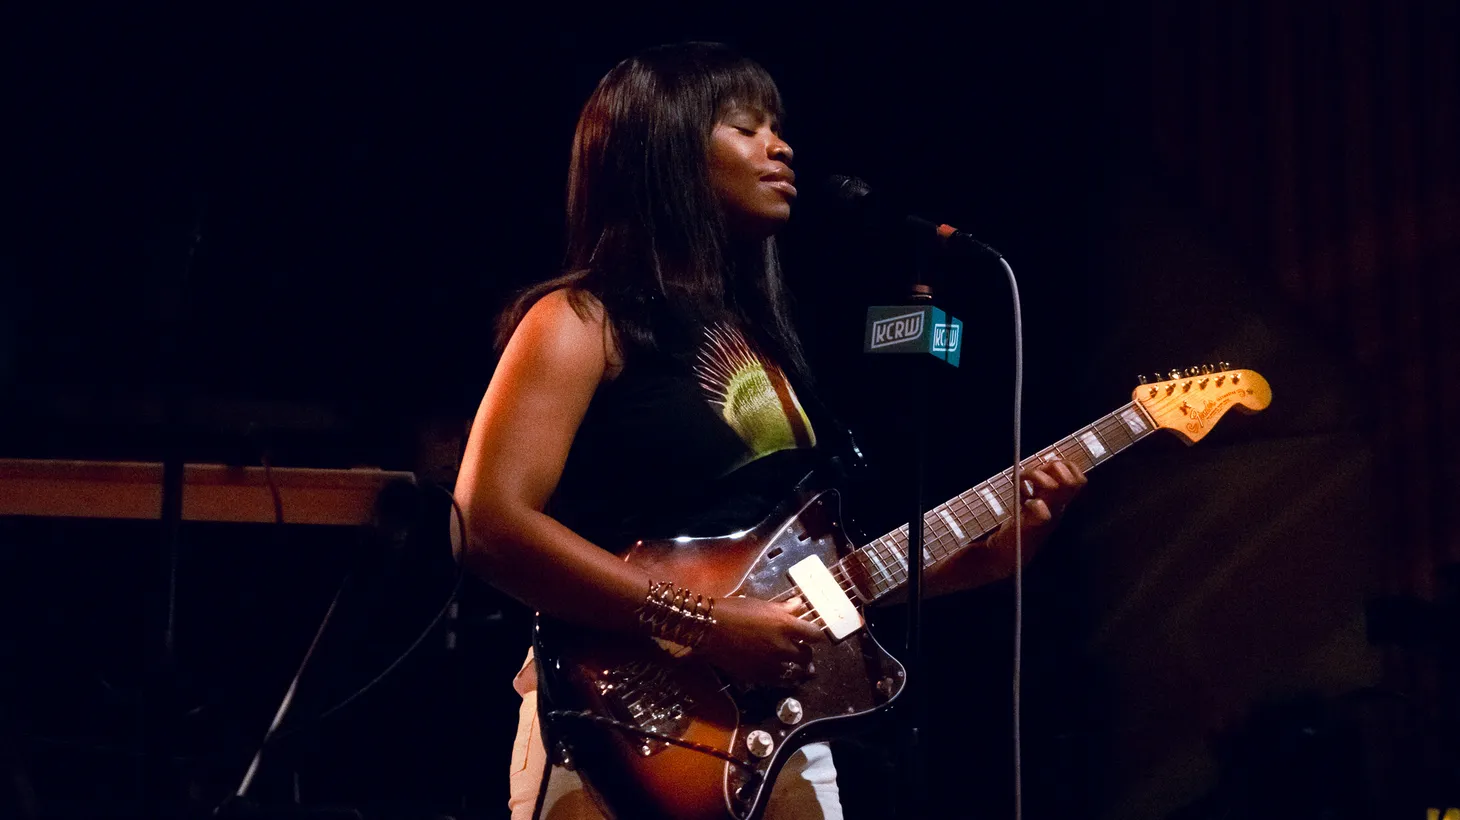 Vagabon's stage presence is a sight (and sound) to behold.